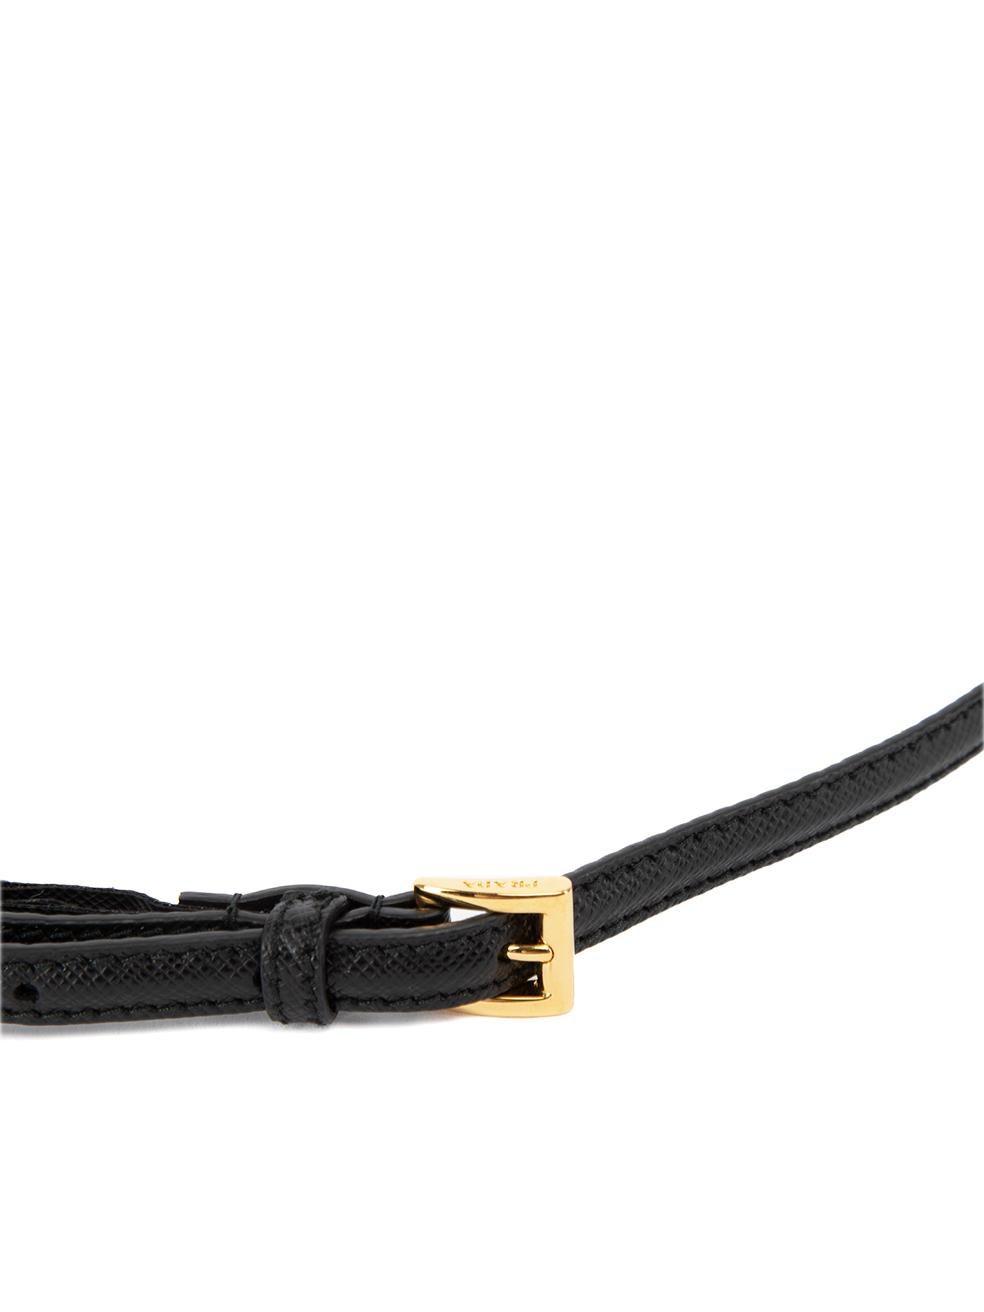 CONDITION is Very good. Hardly any visible wear to belt is evident. Minor loose threads seen around the buckle is seen on this used Prada designer resale item. Details Black Leather Thin skinny belt Gold tone buckle fastening Made in Italy